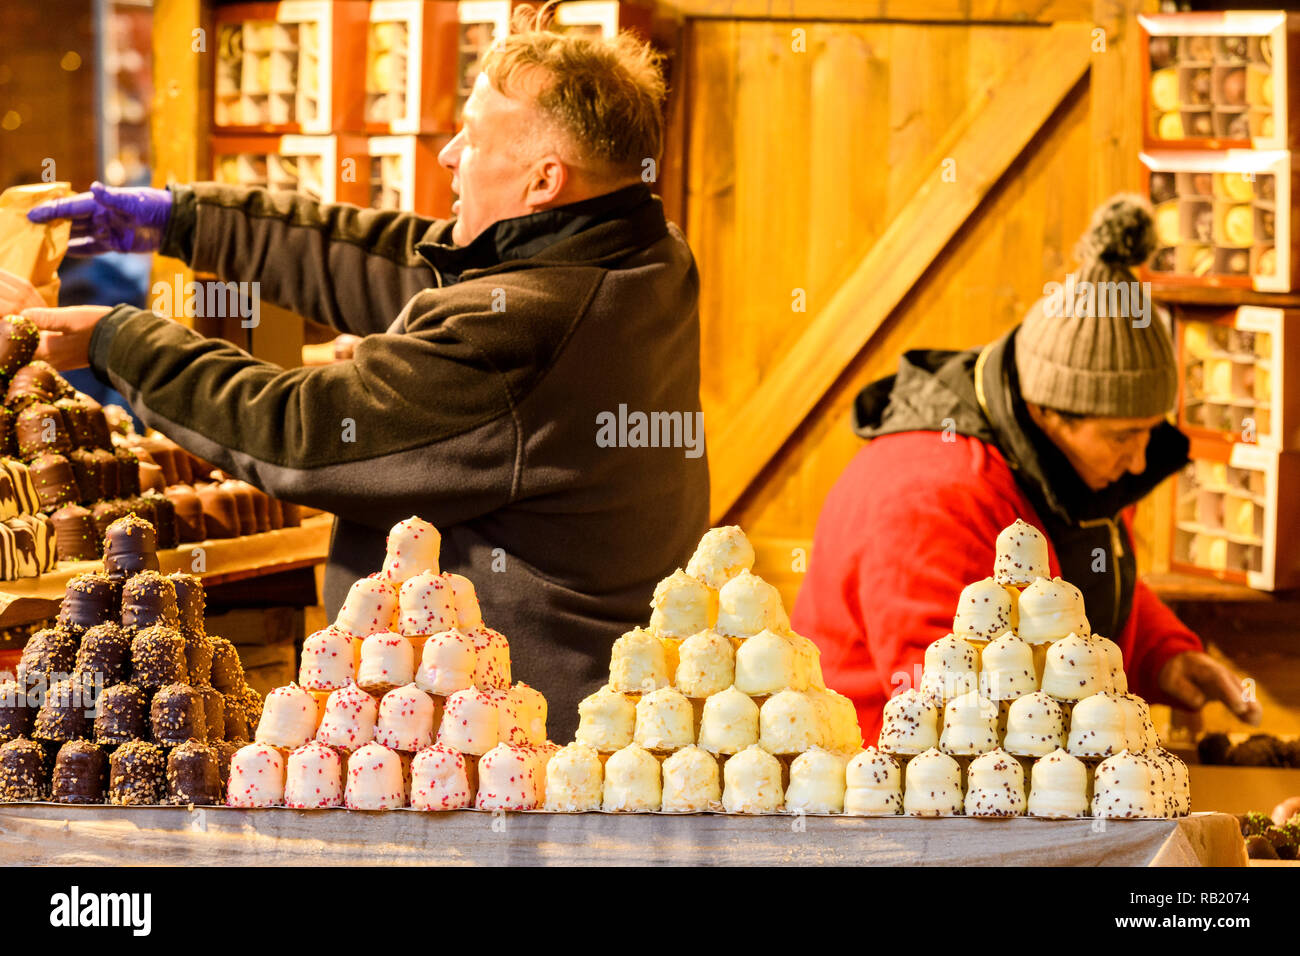 People working on Christmas Market stall, selling chocolates (varieties of chocolate teacakes displayed on counter & in boxes) - York, England, UK Stock Photo